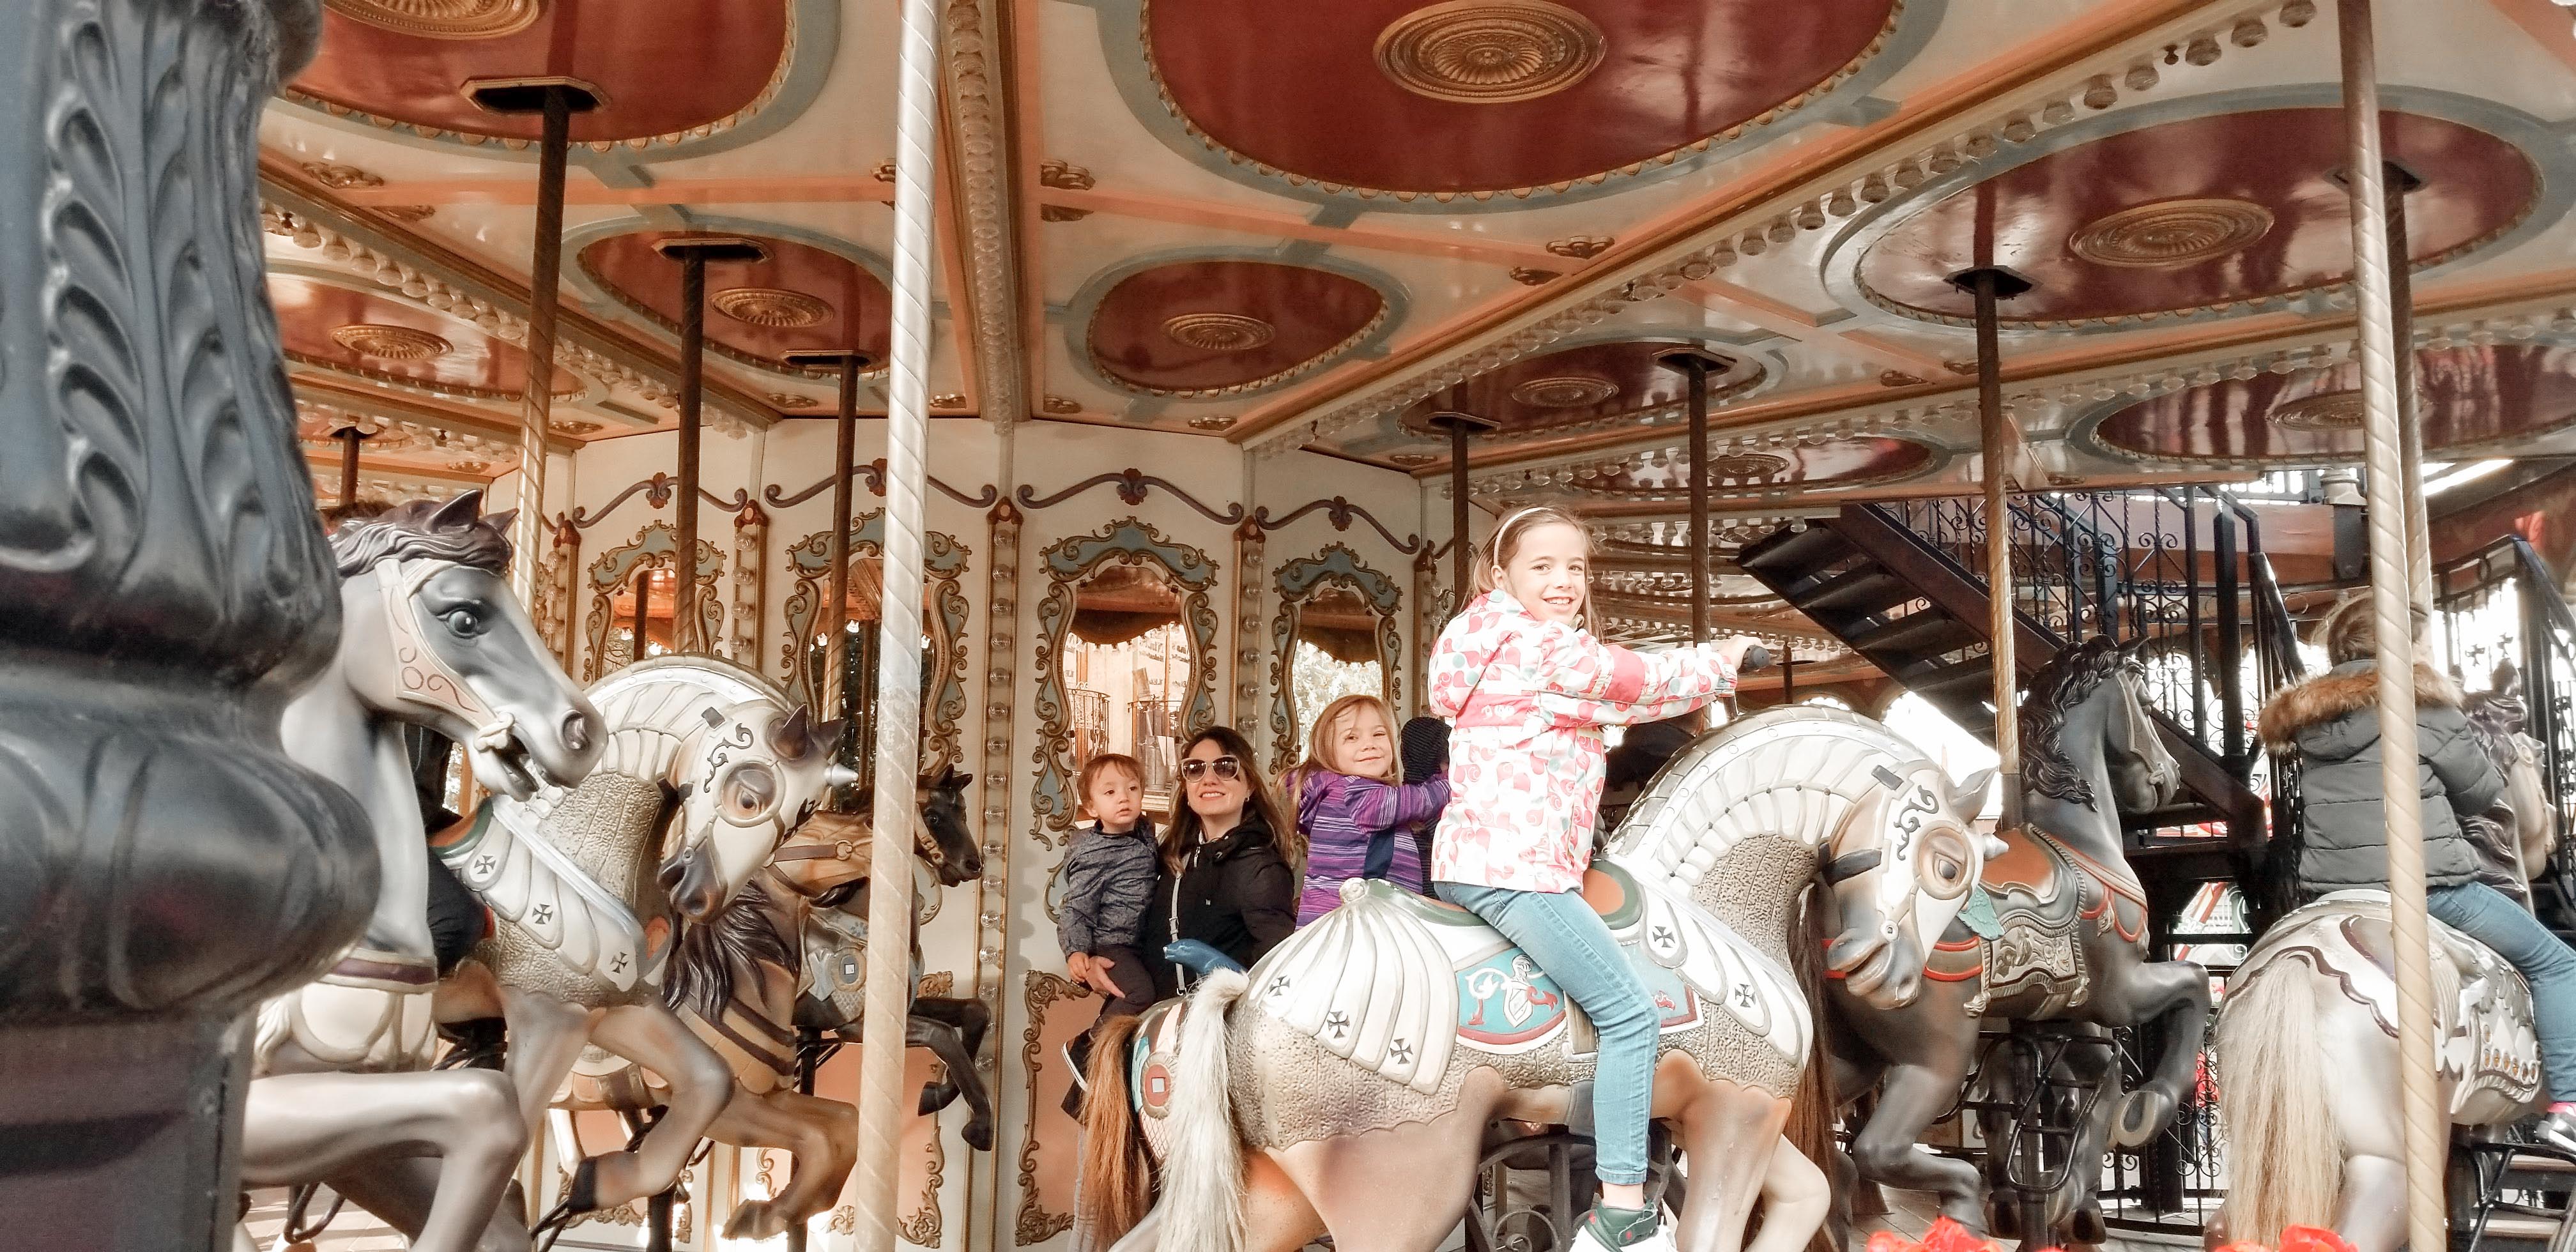 Alice, Diana, Arthur and Adriane riding in the carousel.